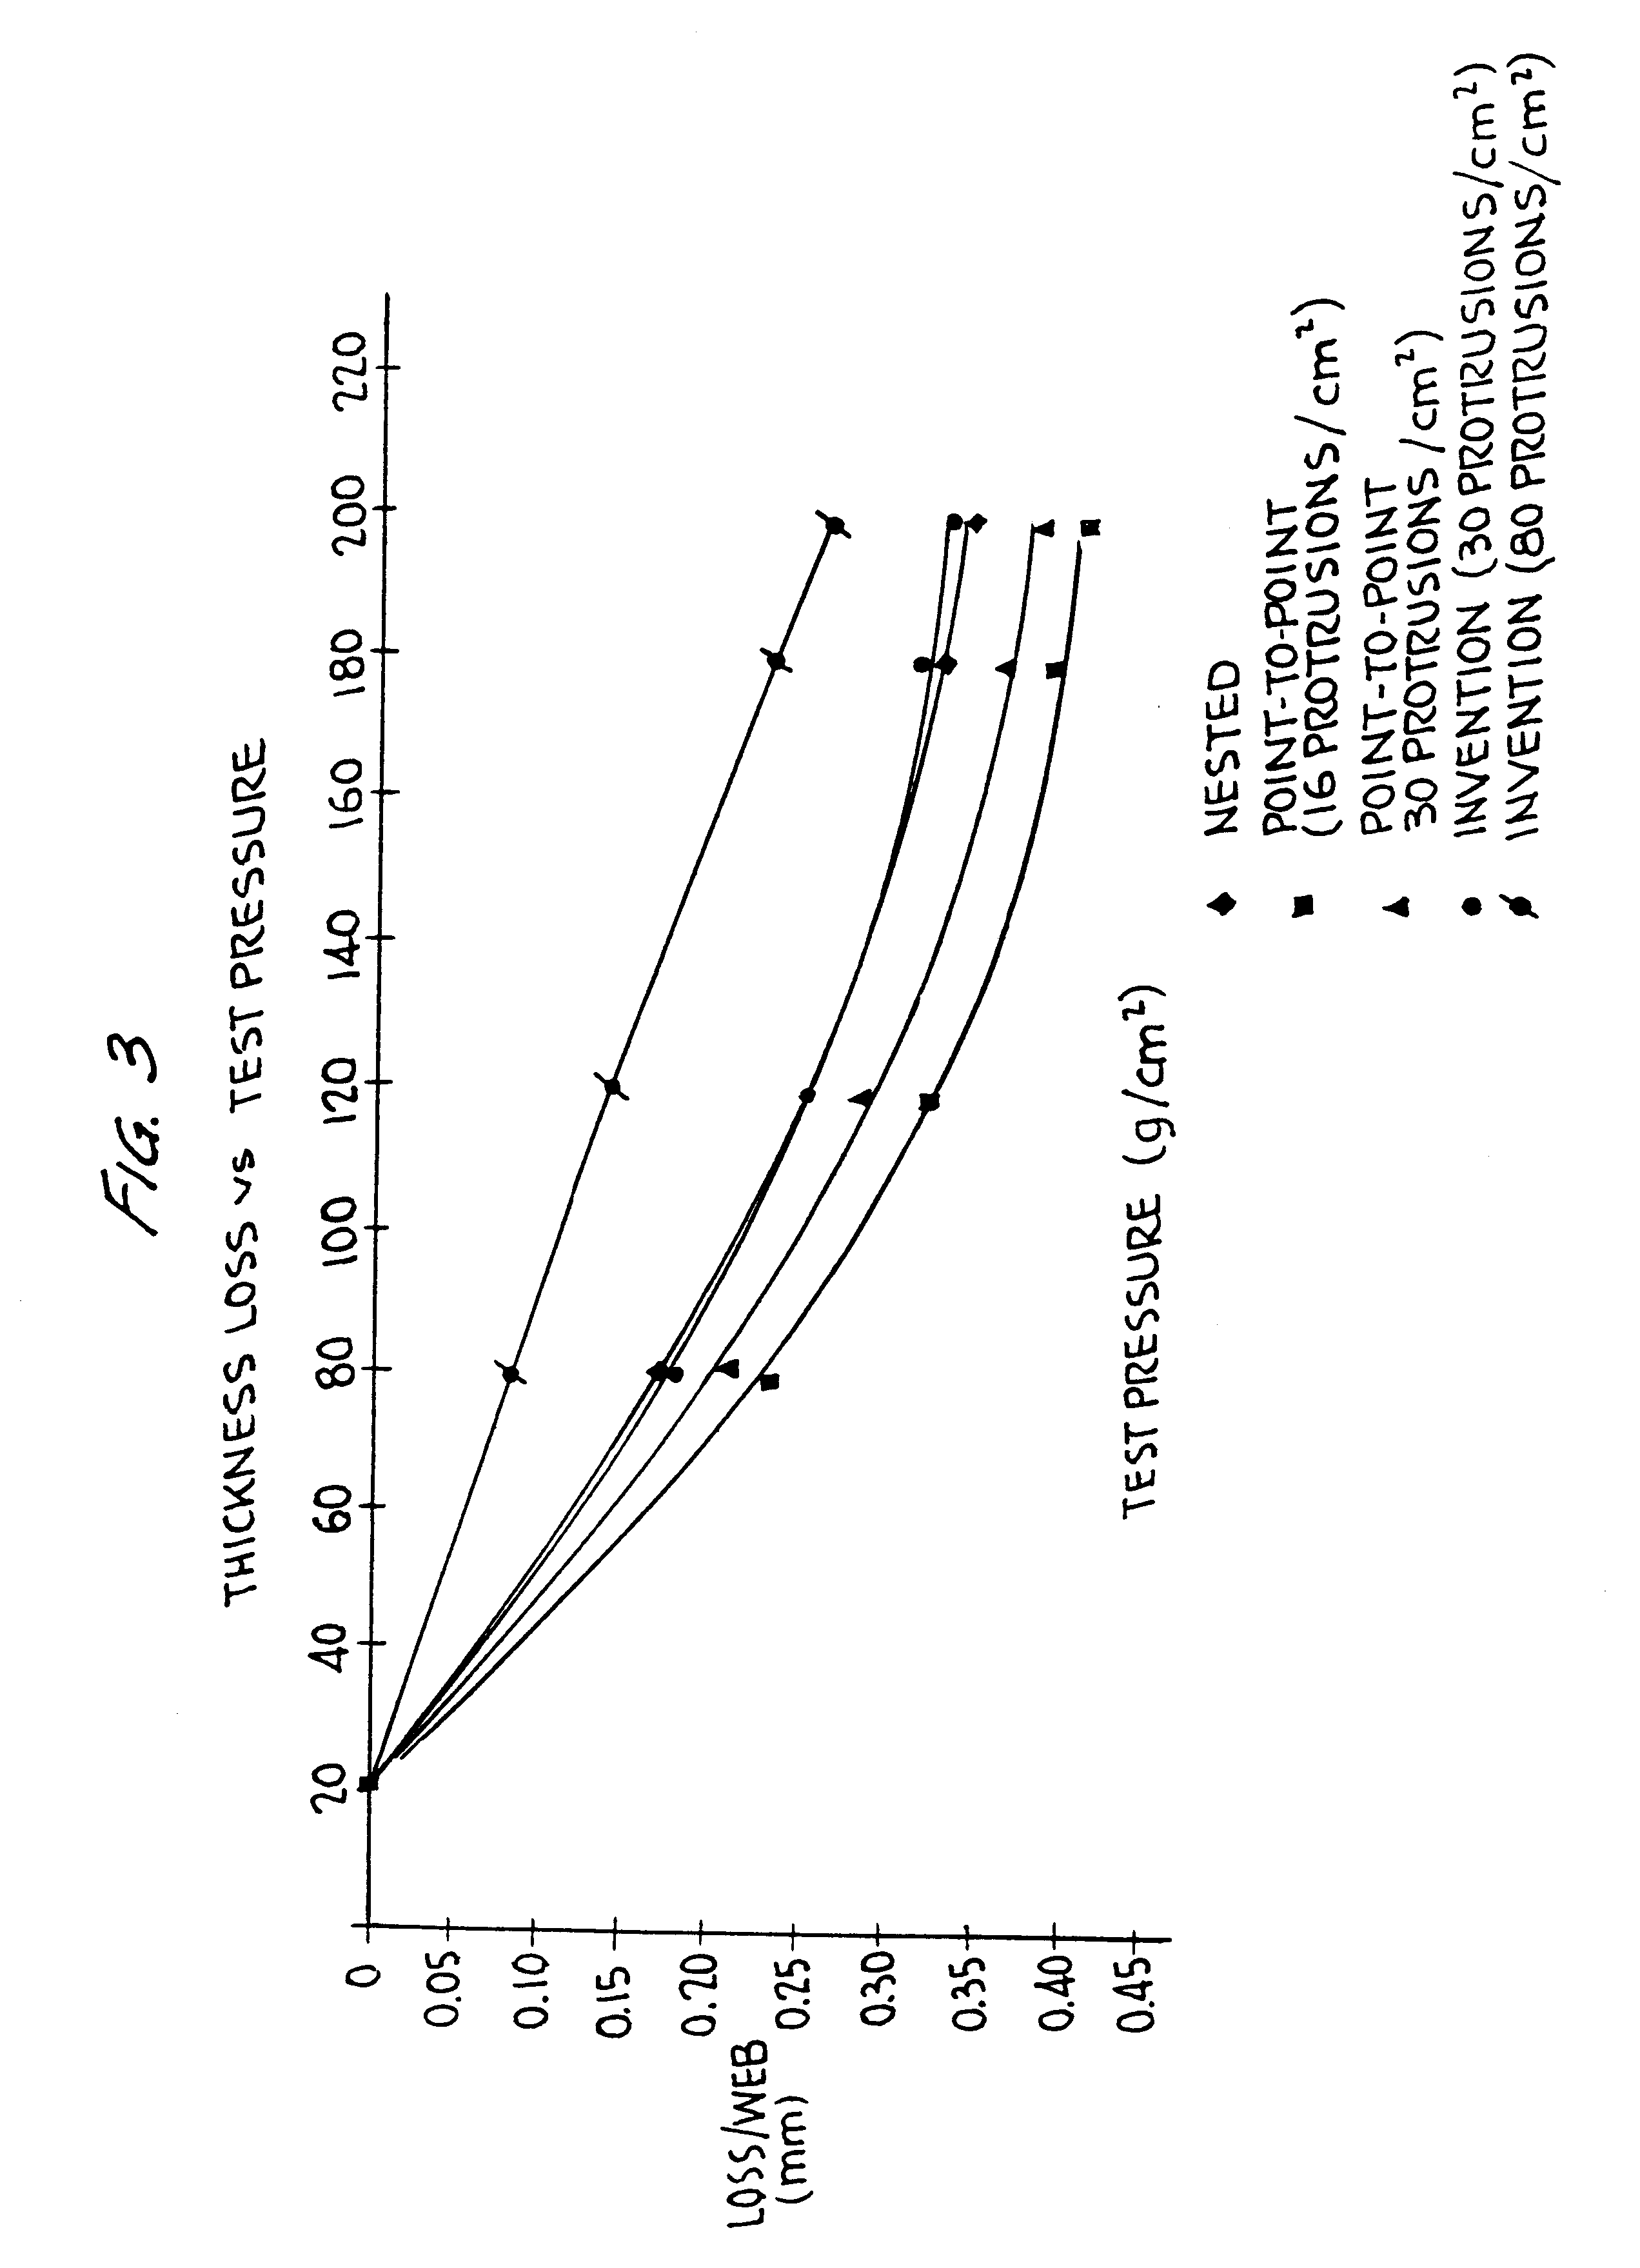 Three ply absorbent paper product and method of making